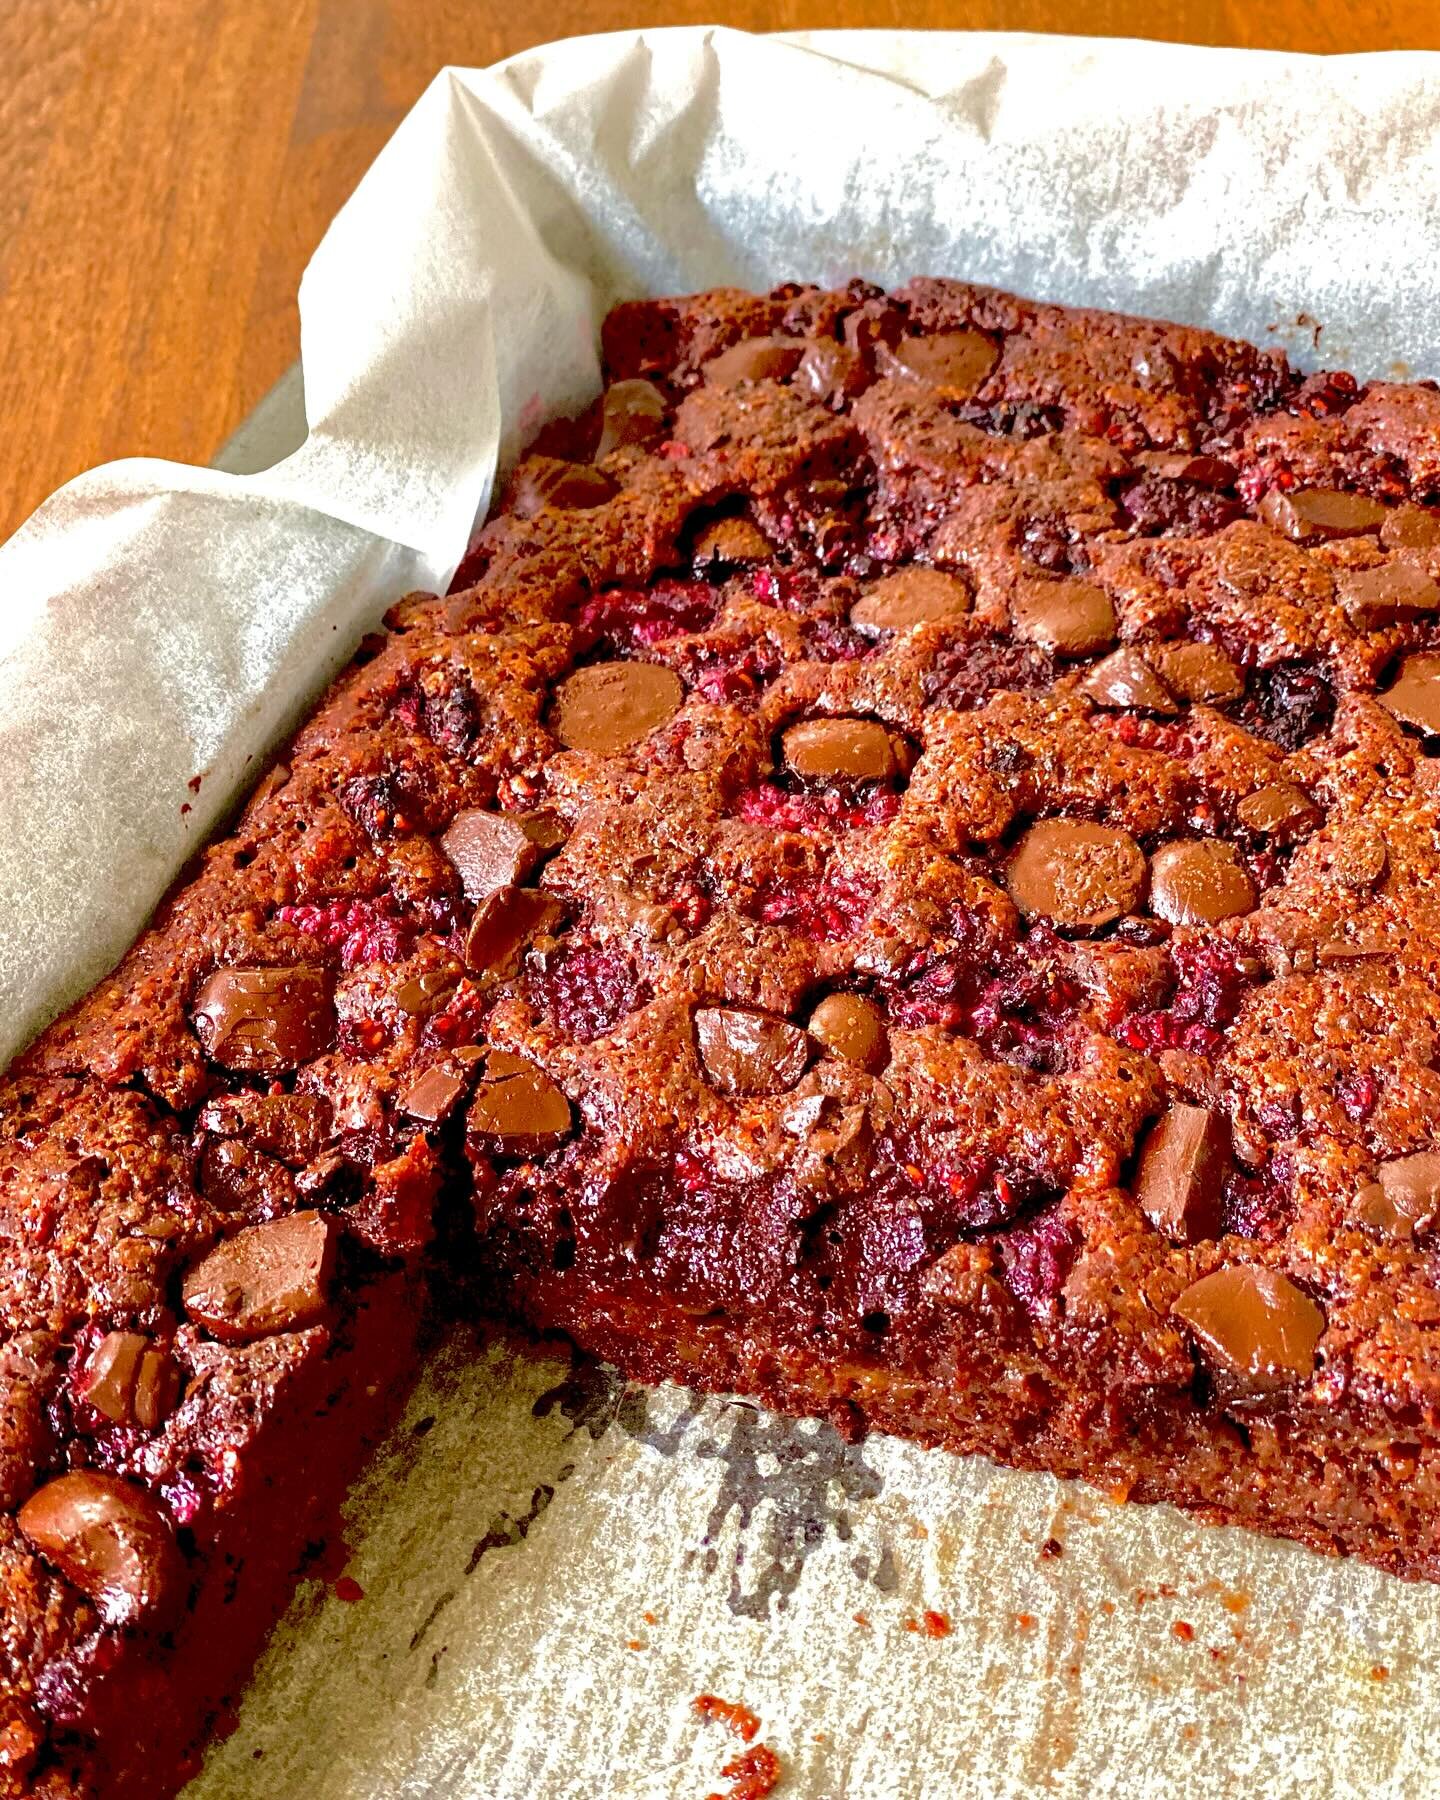 Here&rsquo;s our go-to Vegan and GF Chocolate chip brownie!

Without flax or chia as egg replacements, and one that doesn&rsquo;t get dry overnight - if any survive 😂

I&rsquo;m always looking for healthier ways to make decadent treats.

You know, o